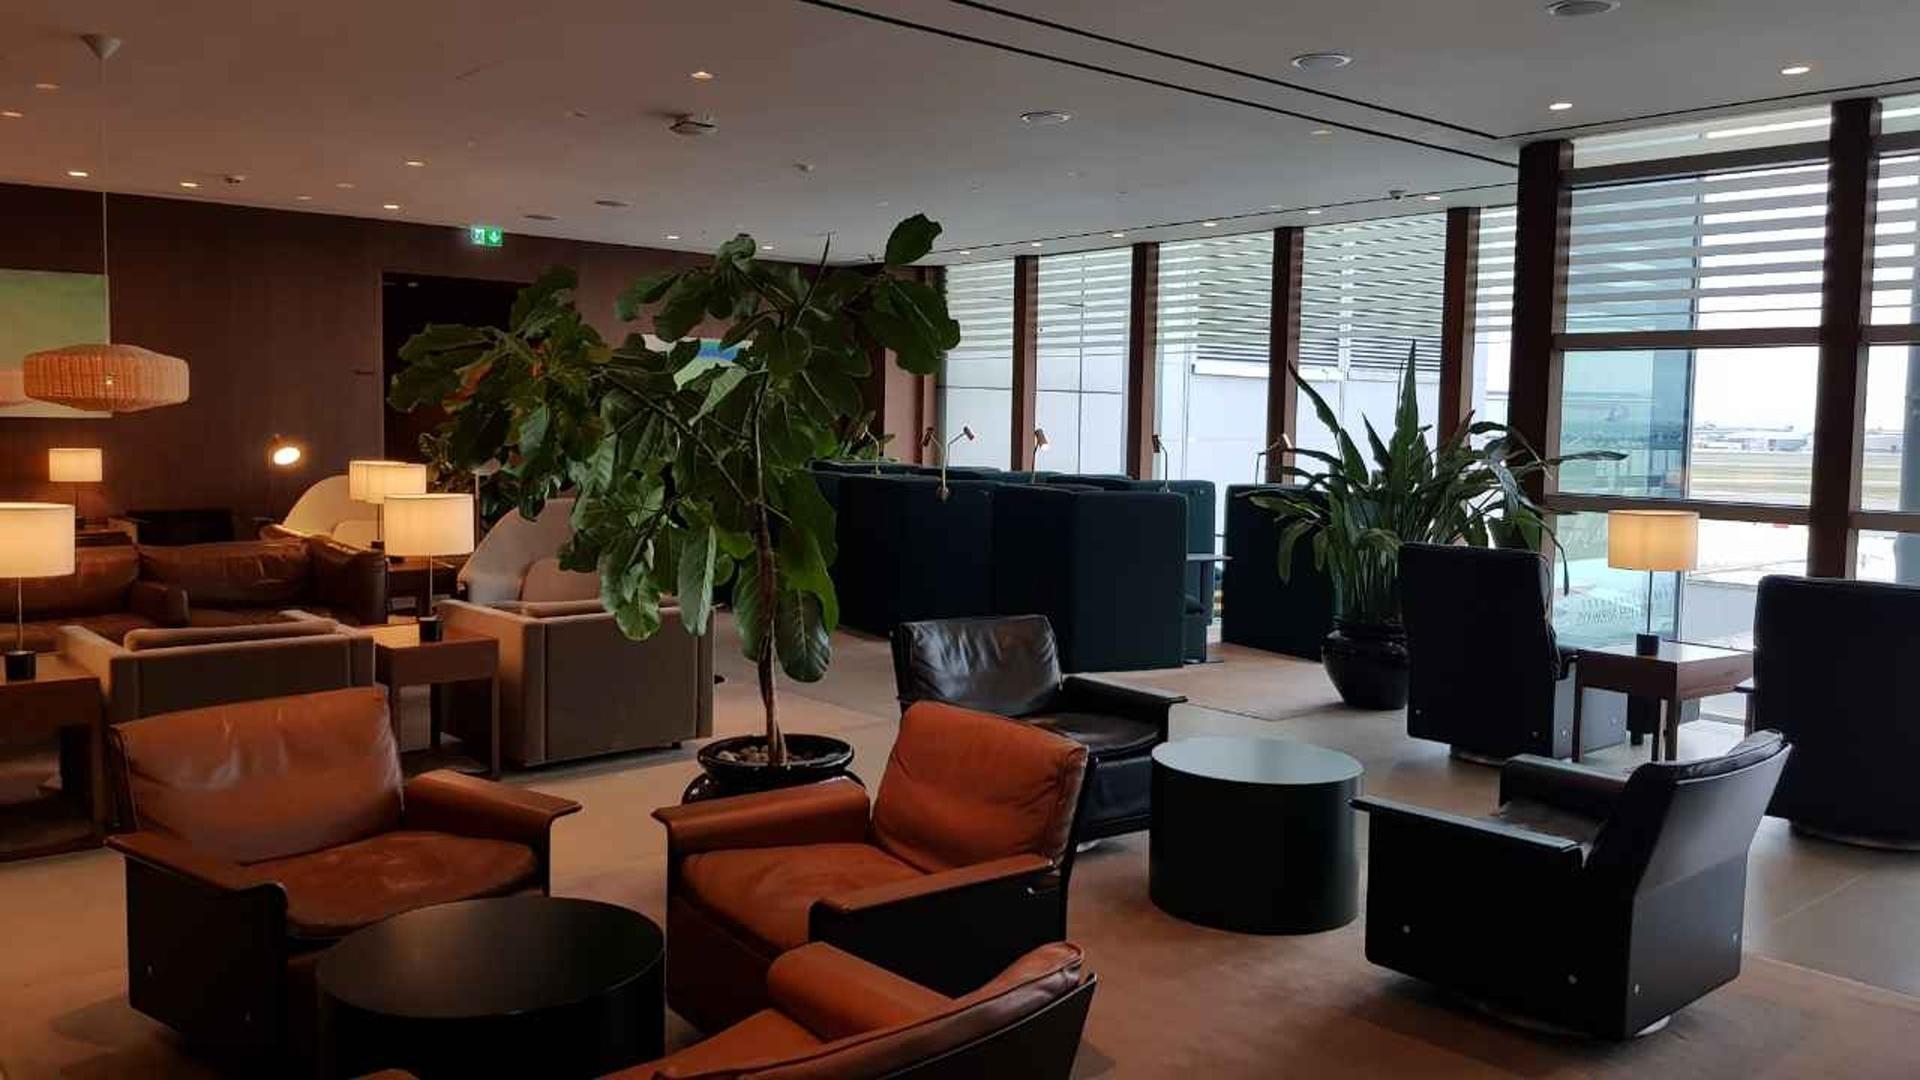 Cathay Pacific Business Class Lounge image 15 of 48